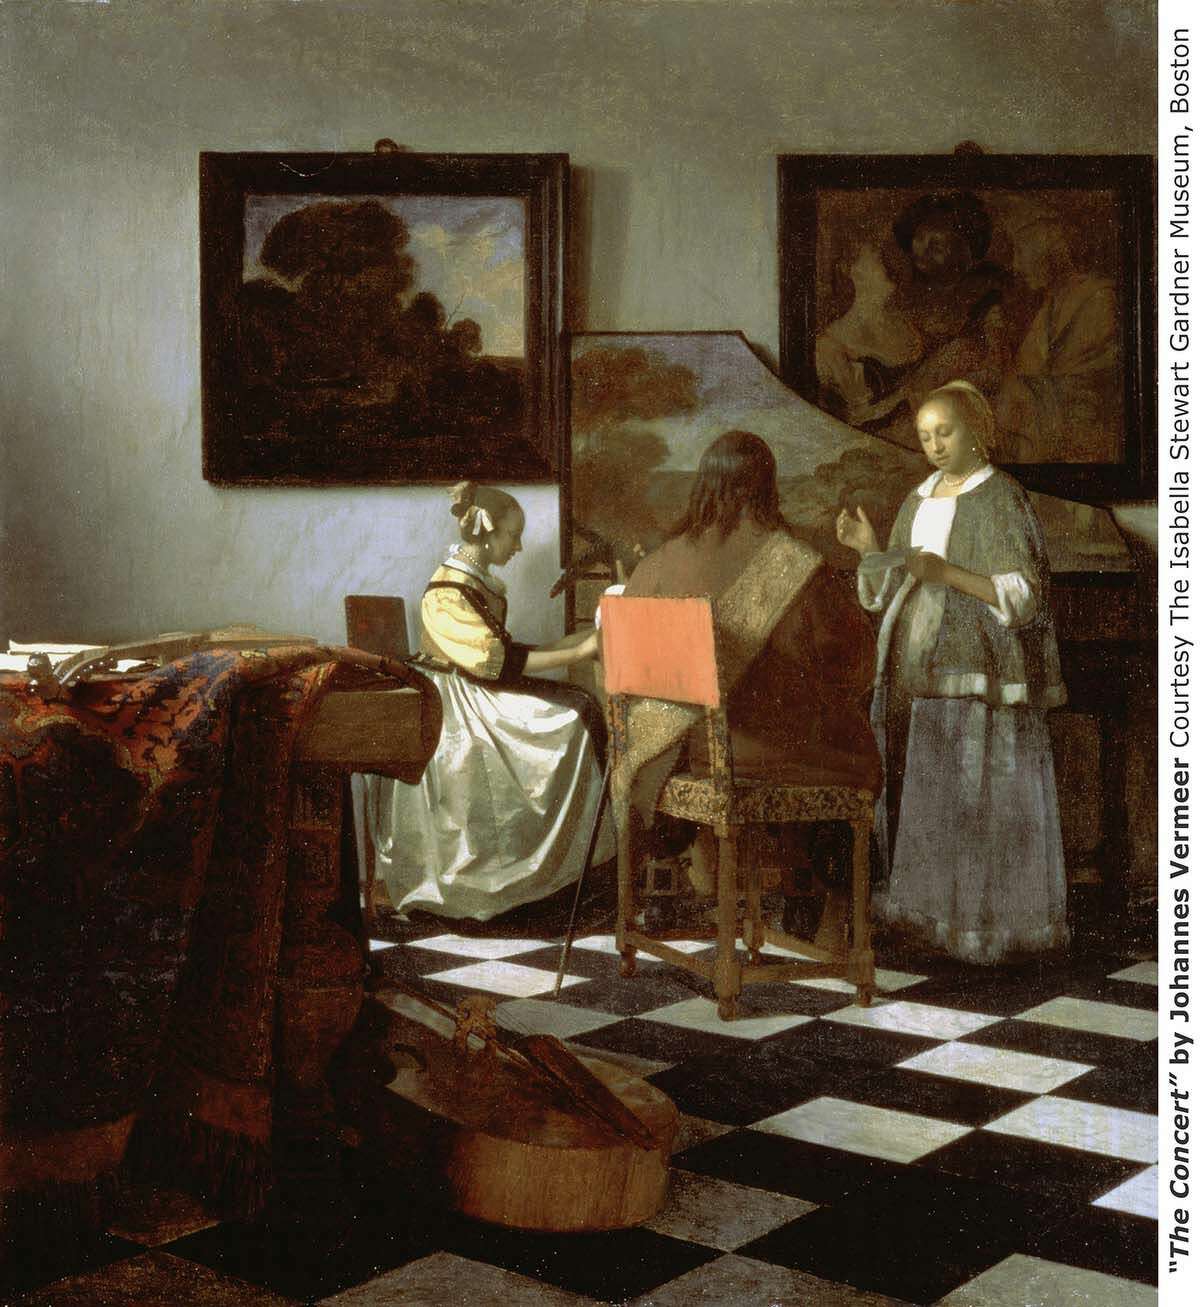 Johannes Vermeer’s painting The Concert was the most valuable piece of art stolen from the Isabella Stewart Gardner Museum in 1990.